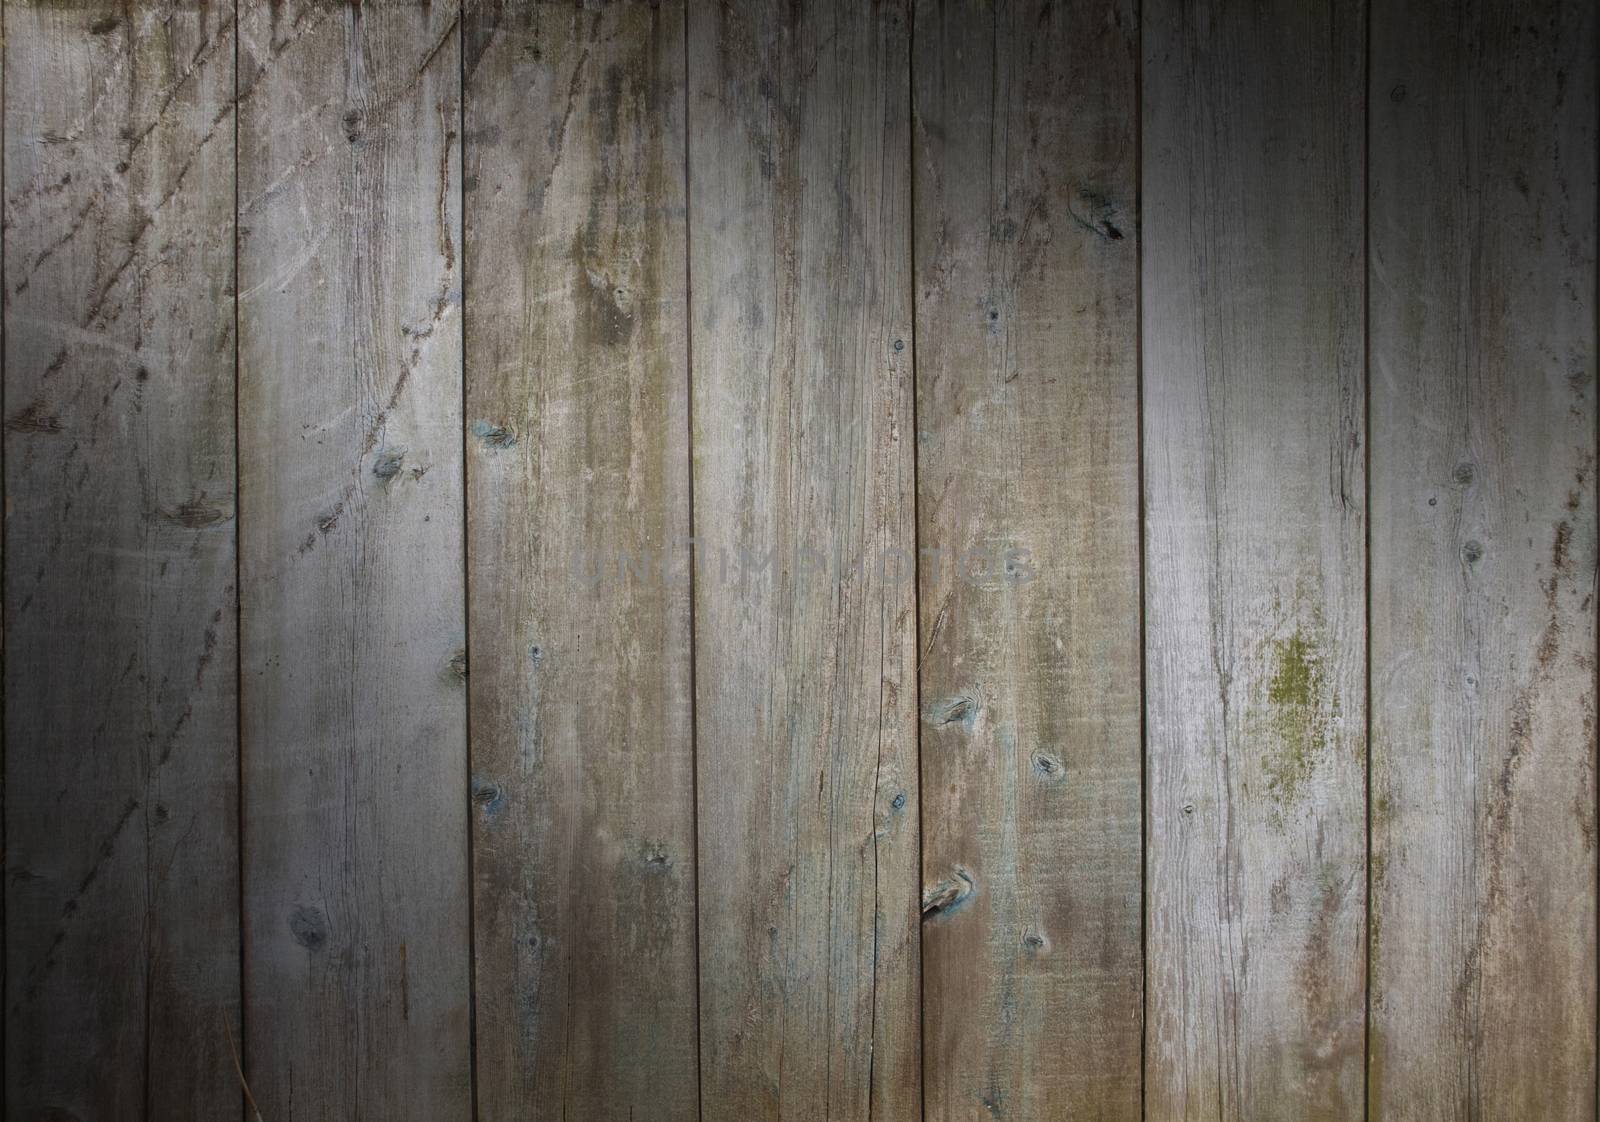 Distressed wooden wall background with weathered boards with scrapes and algae, lit diagonally